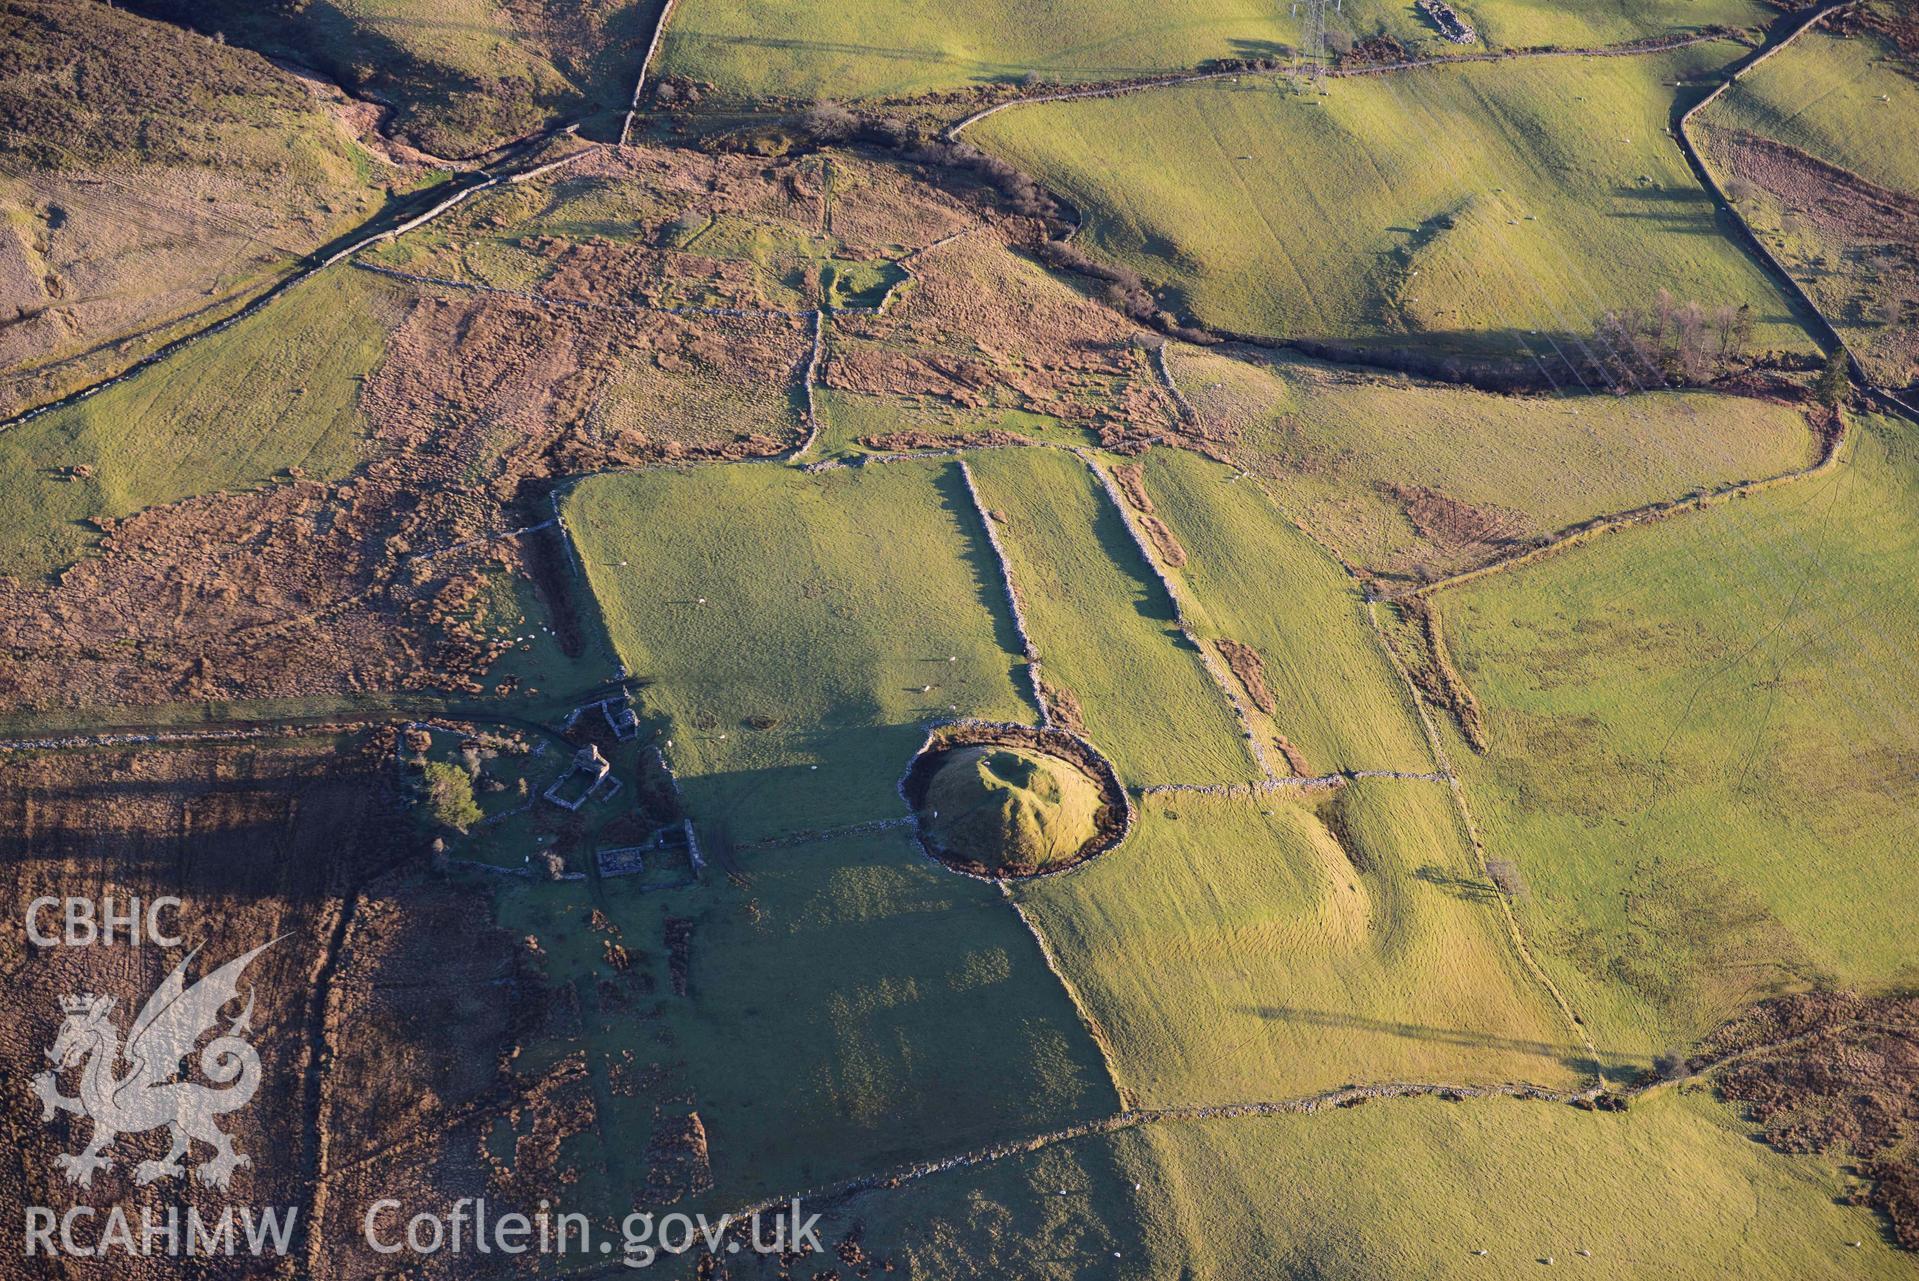 Oblique aerial photograph of Tomen y Mur Roman fort and earthwork complex. Taken during the Royal Commission’s programme of archaeological aerial reconnaissance by Toby Driver on 17th January 2022